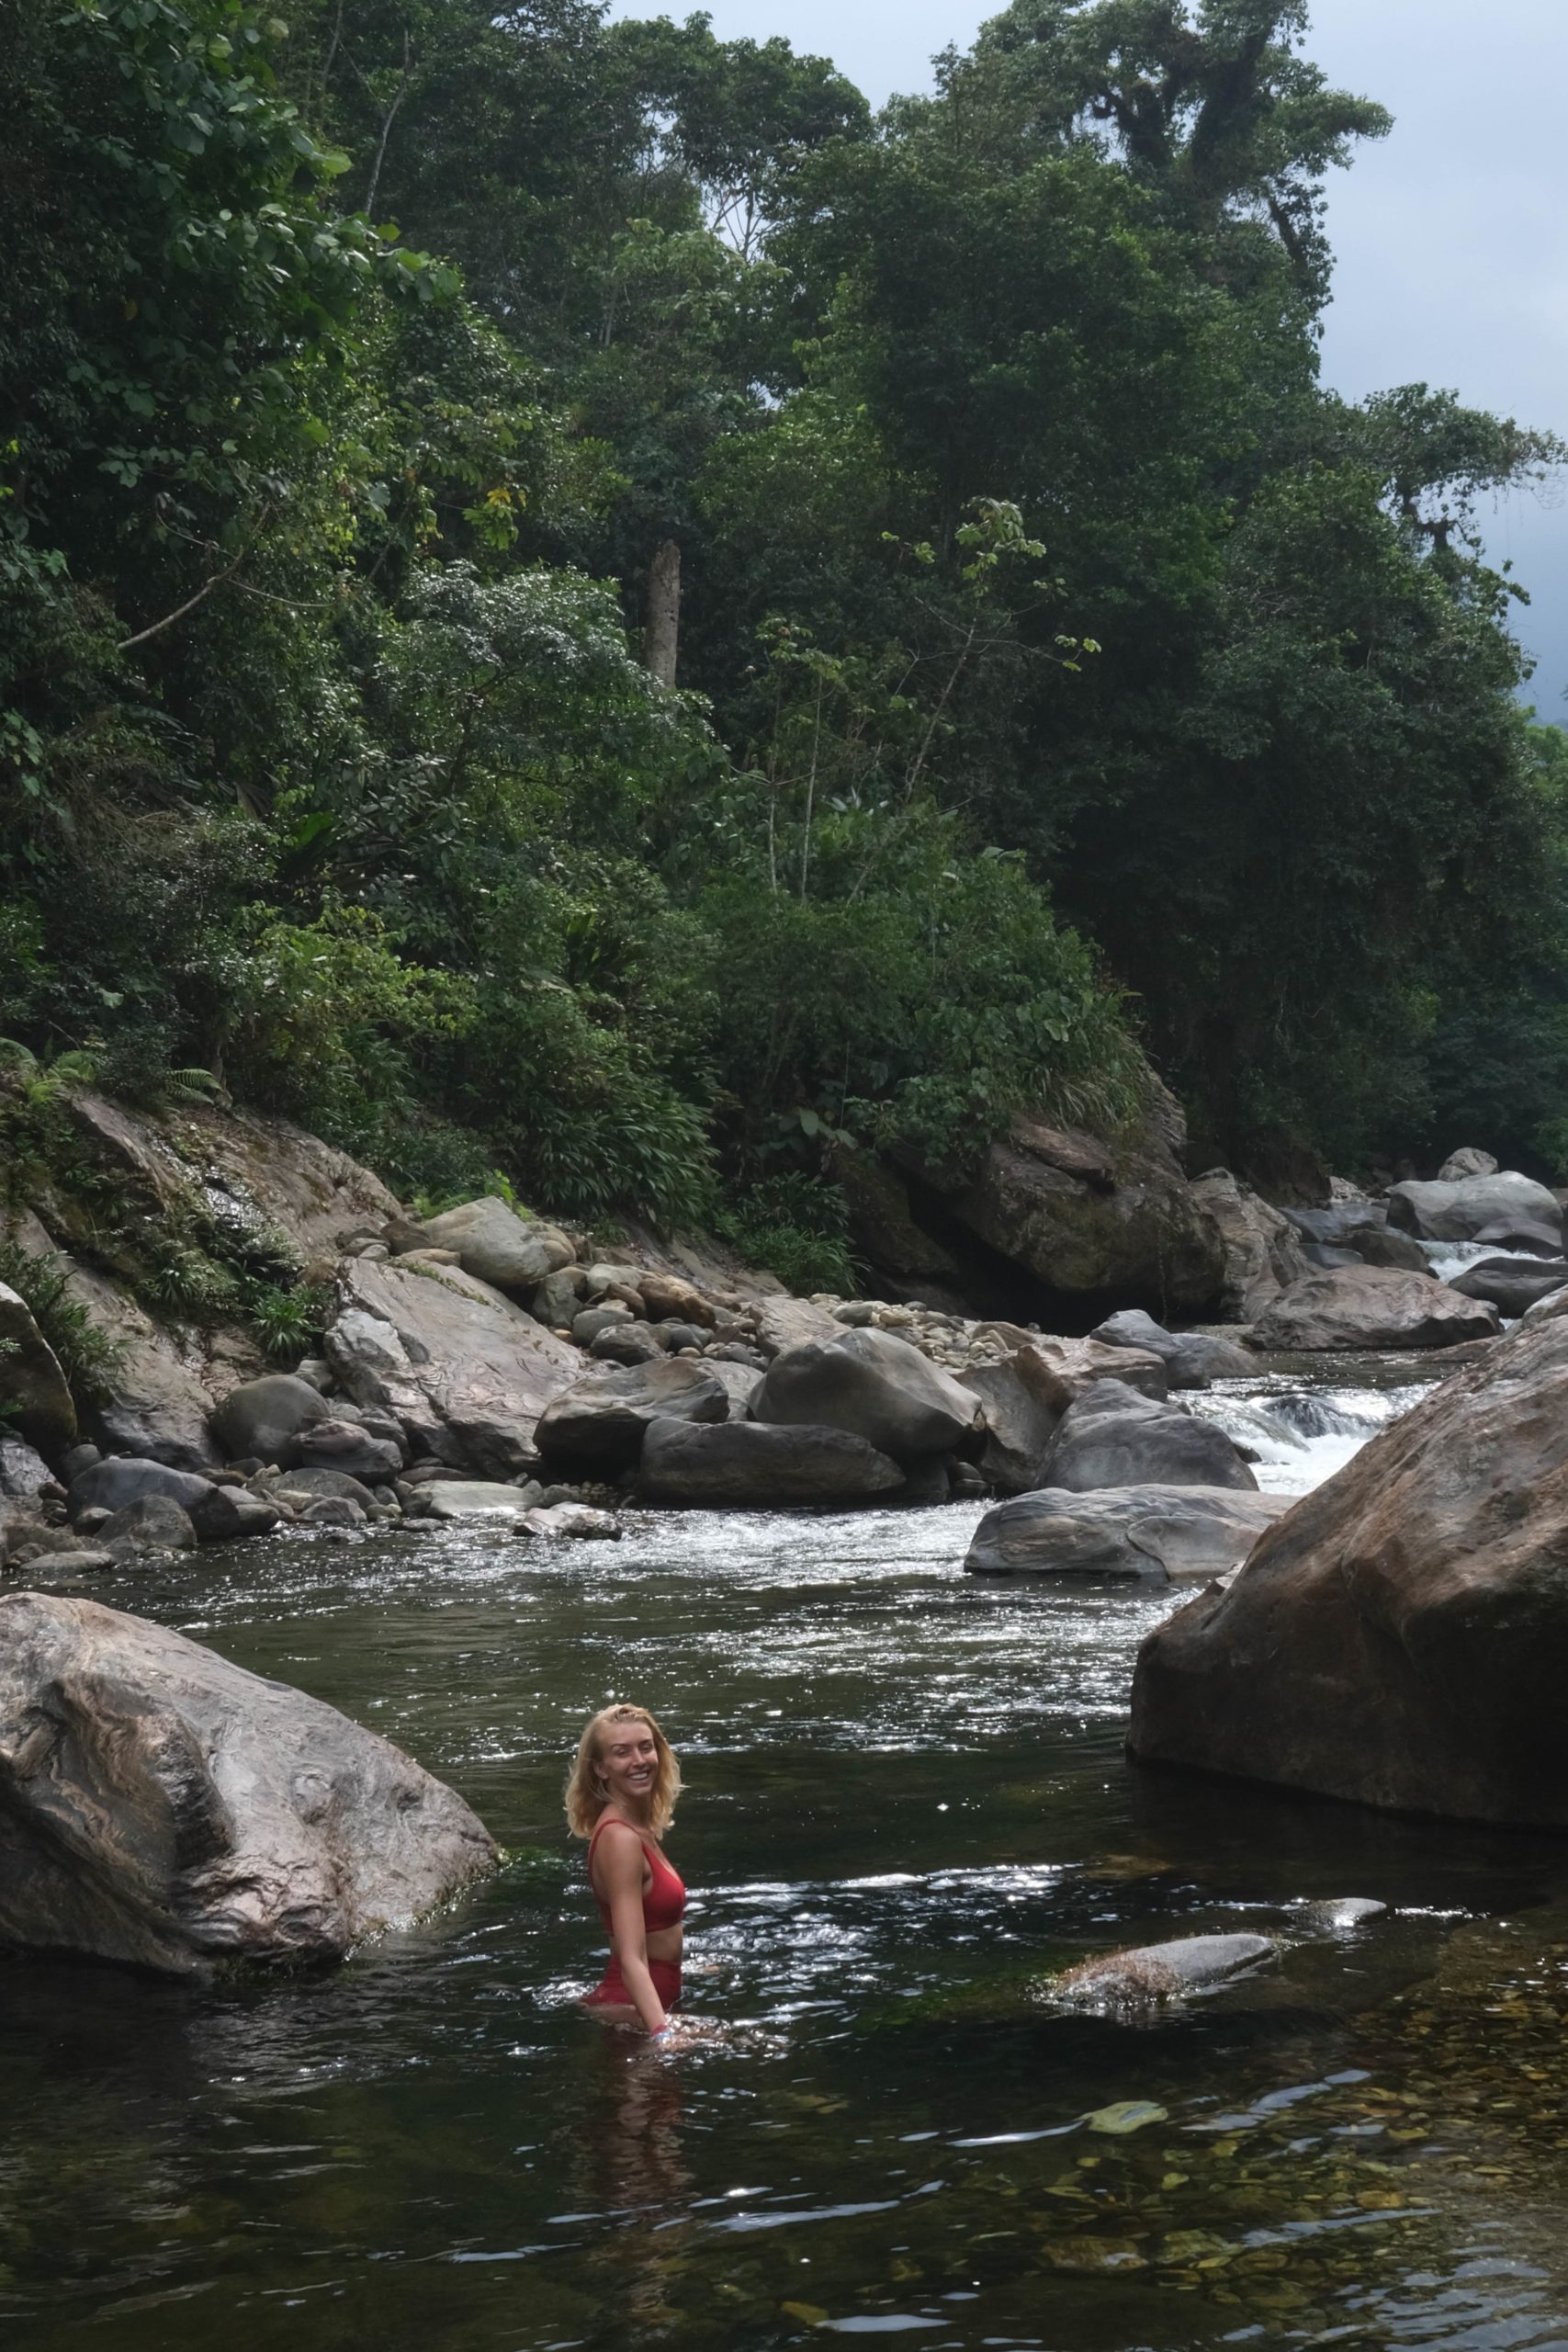 Zanna van Dijk in a river during the Lost City Trek in Colombia